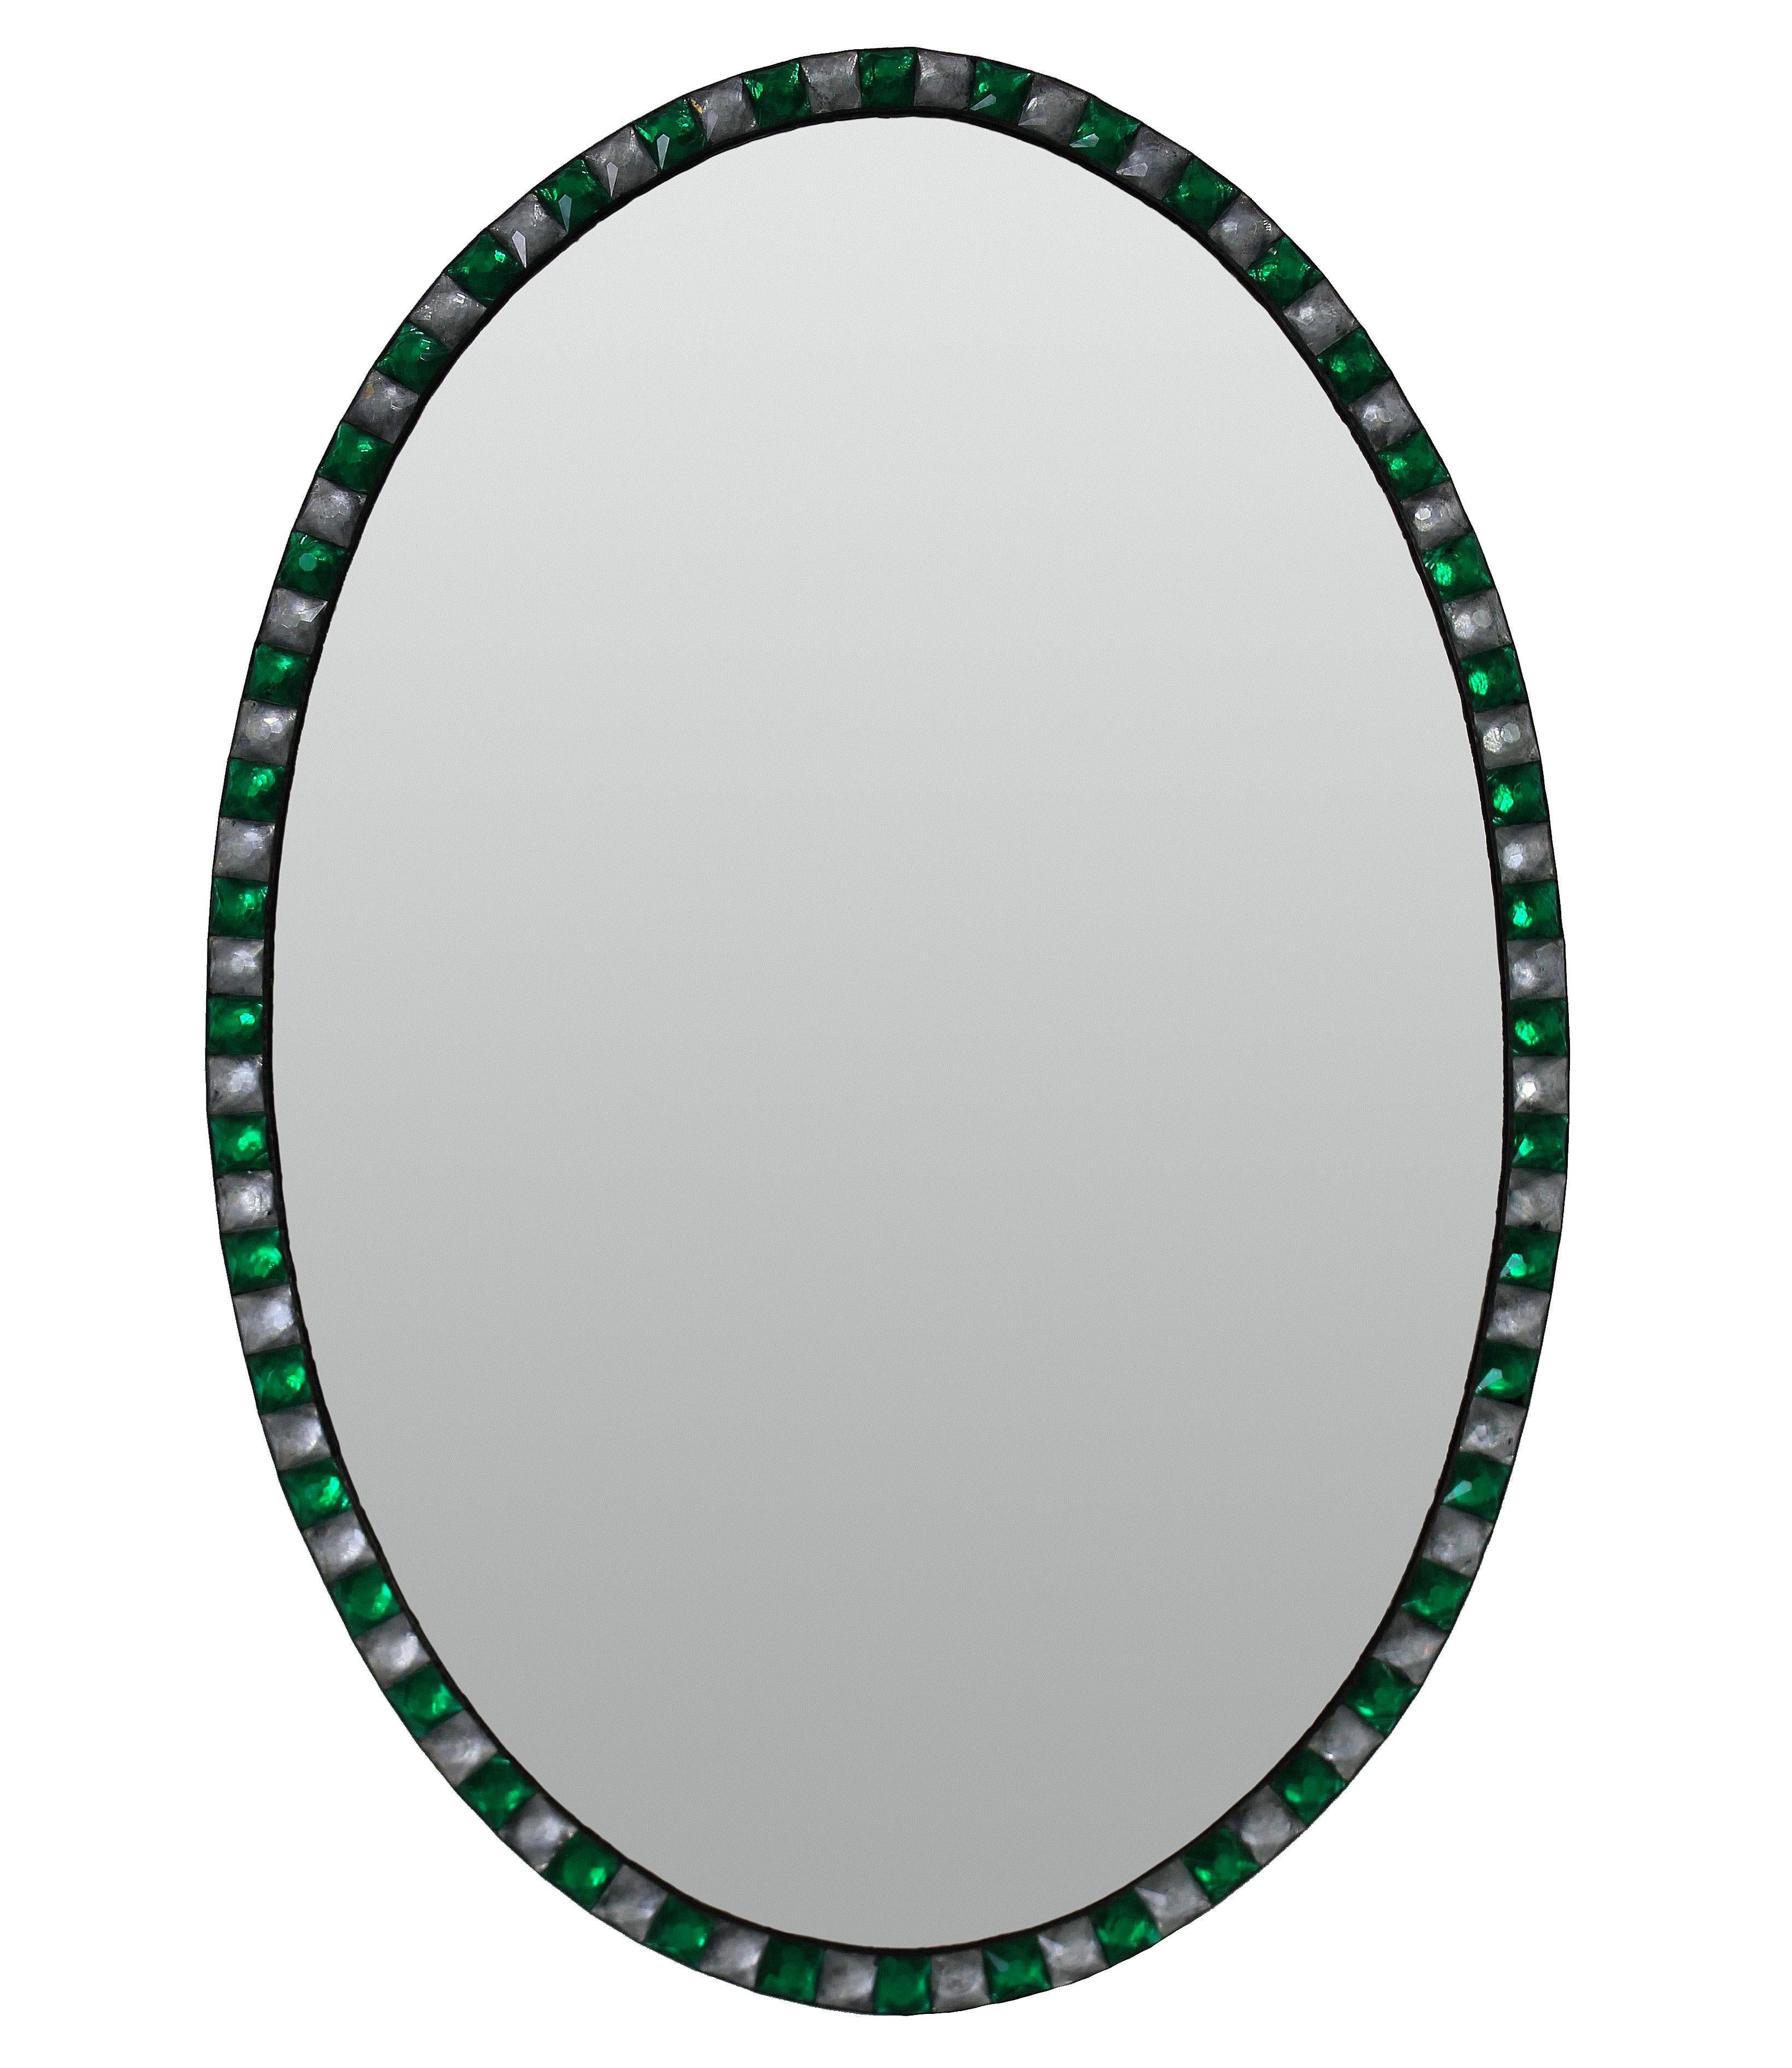 Contemporary Georgian Style Irish Mirrors with Emerald Glass and Rock Crystal Faceted Border